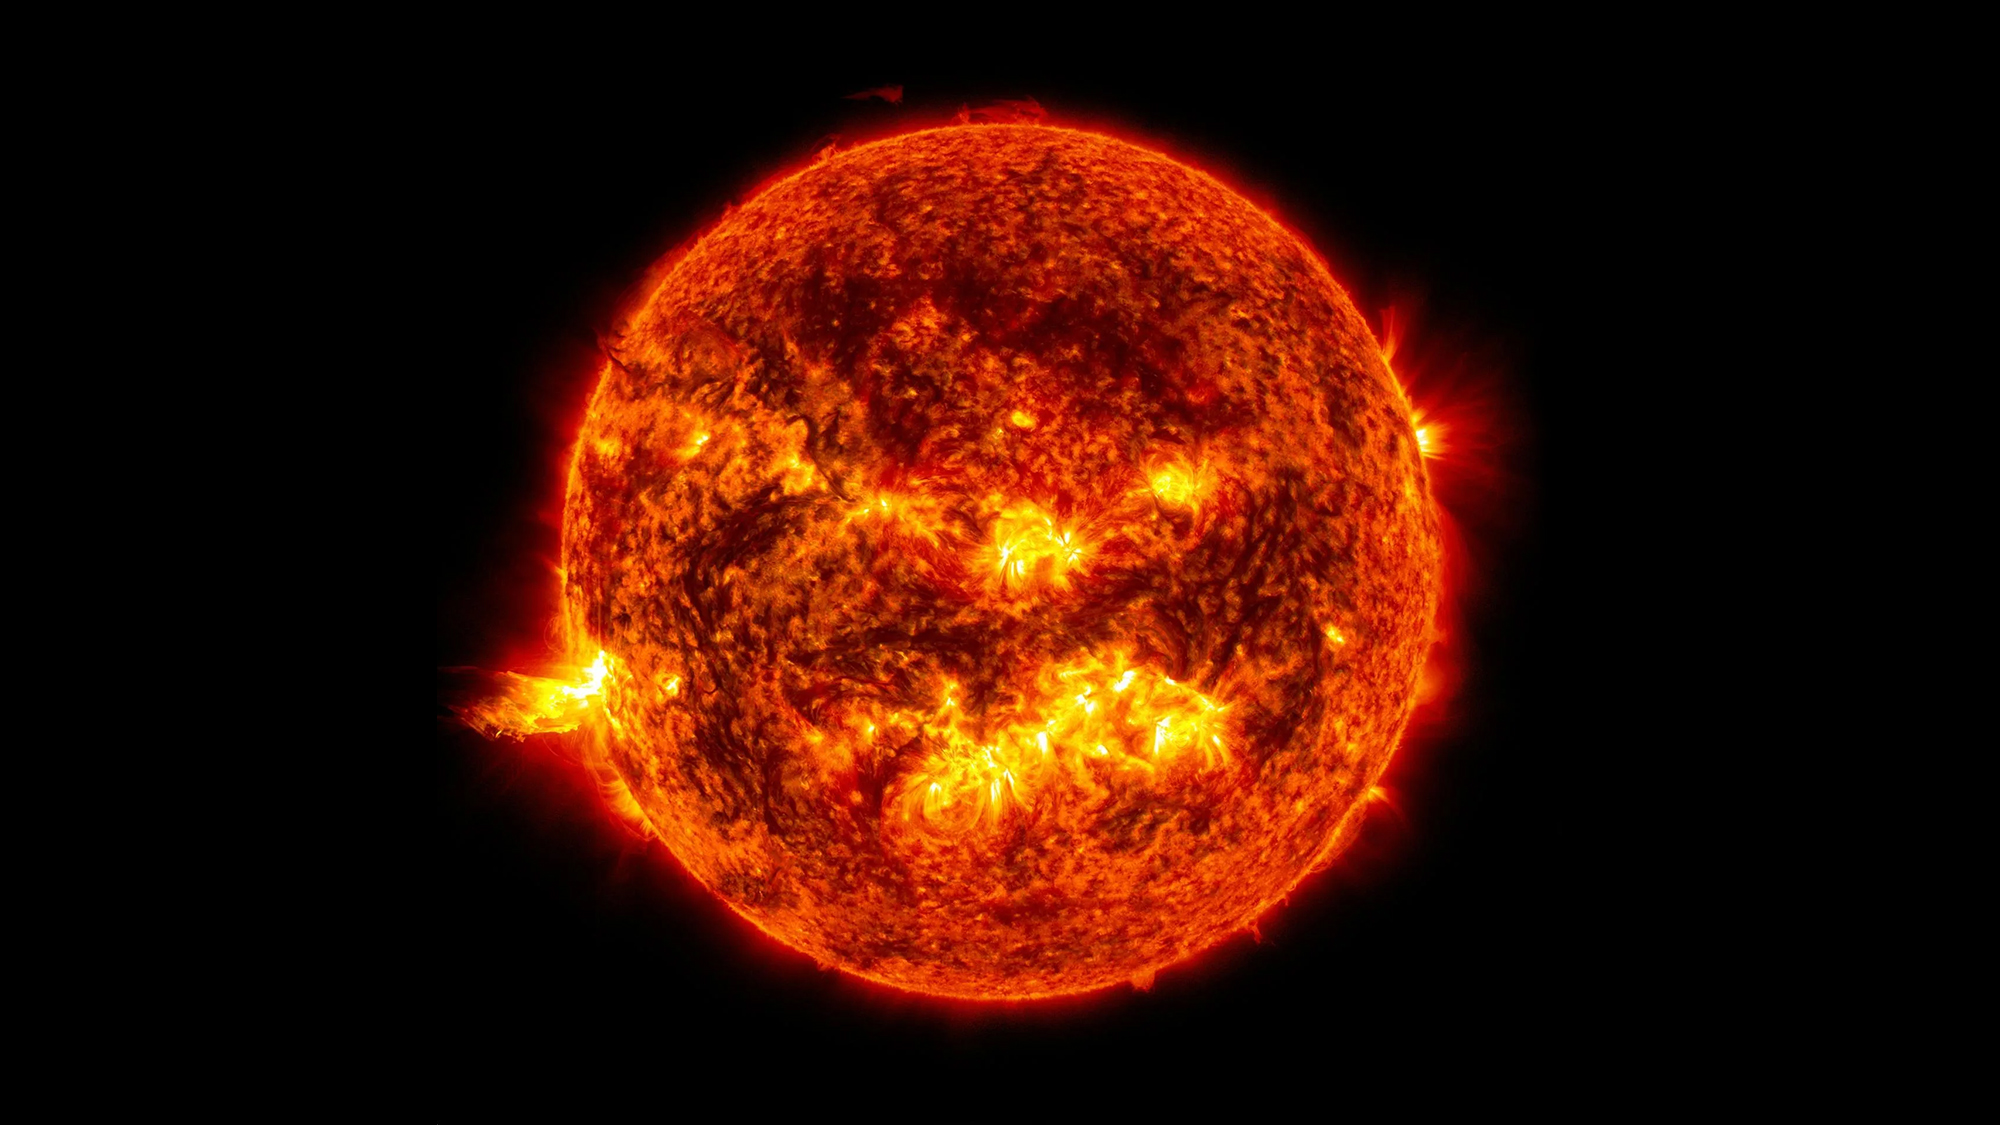 Scientists want to use the sun’s gravity to communicate between stars